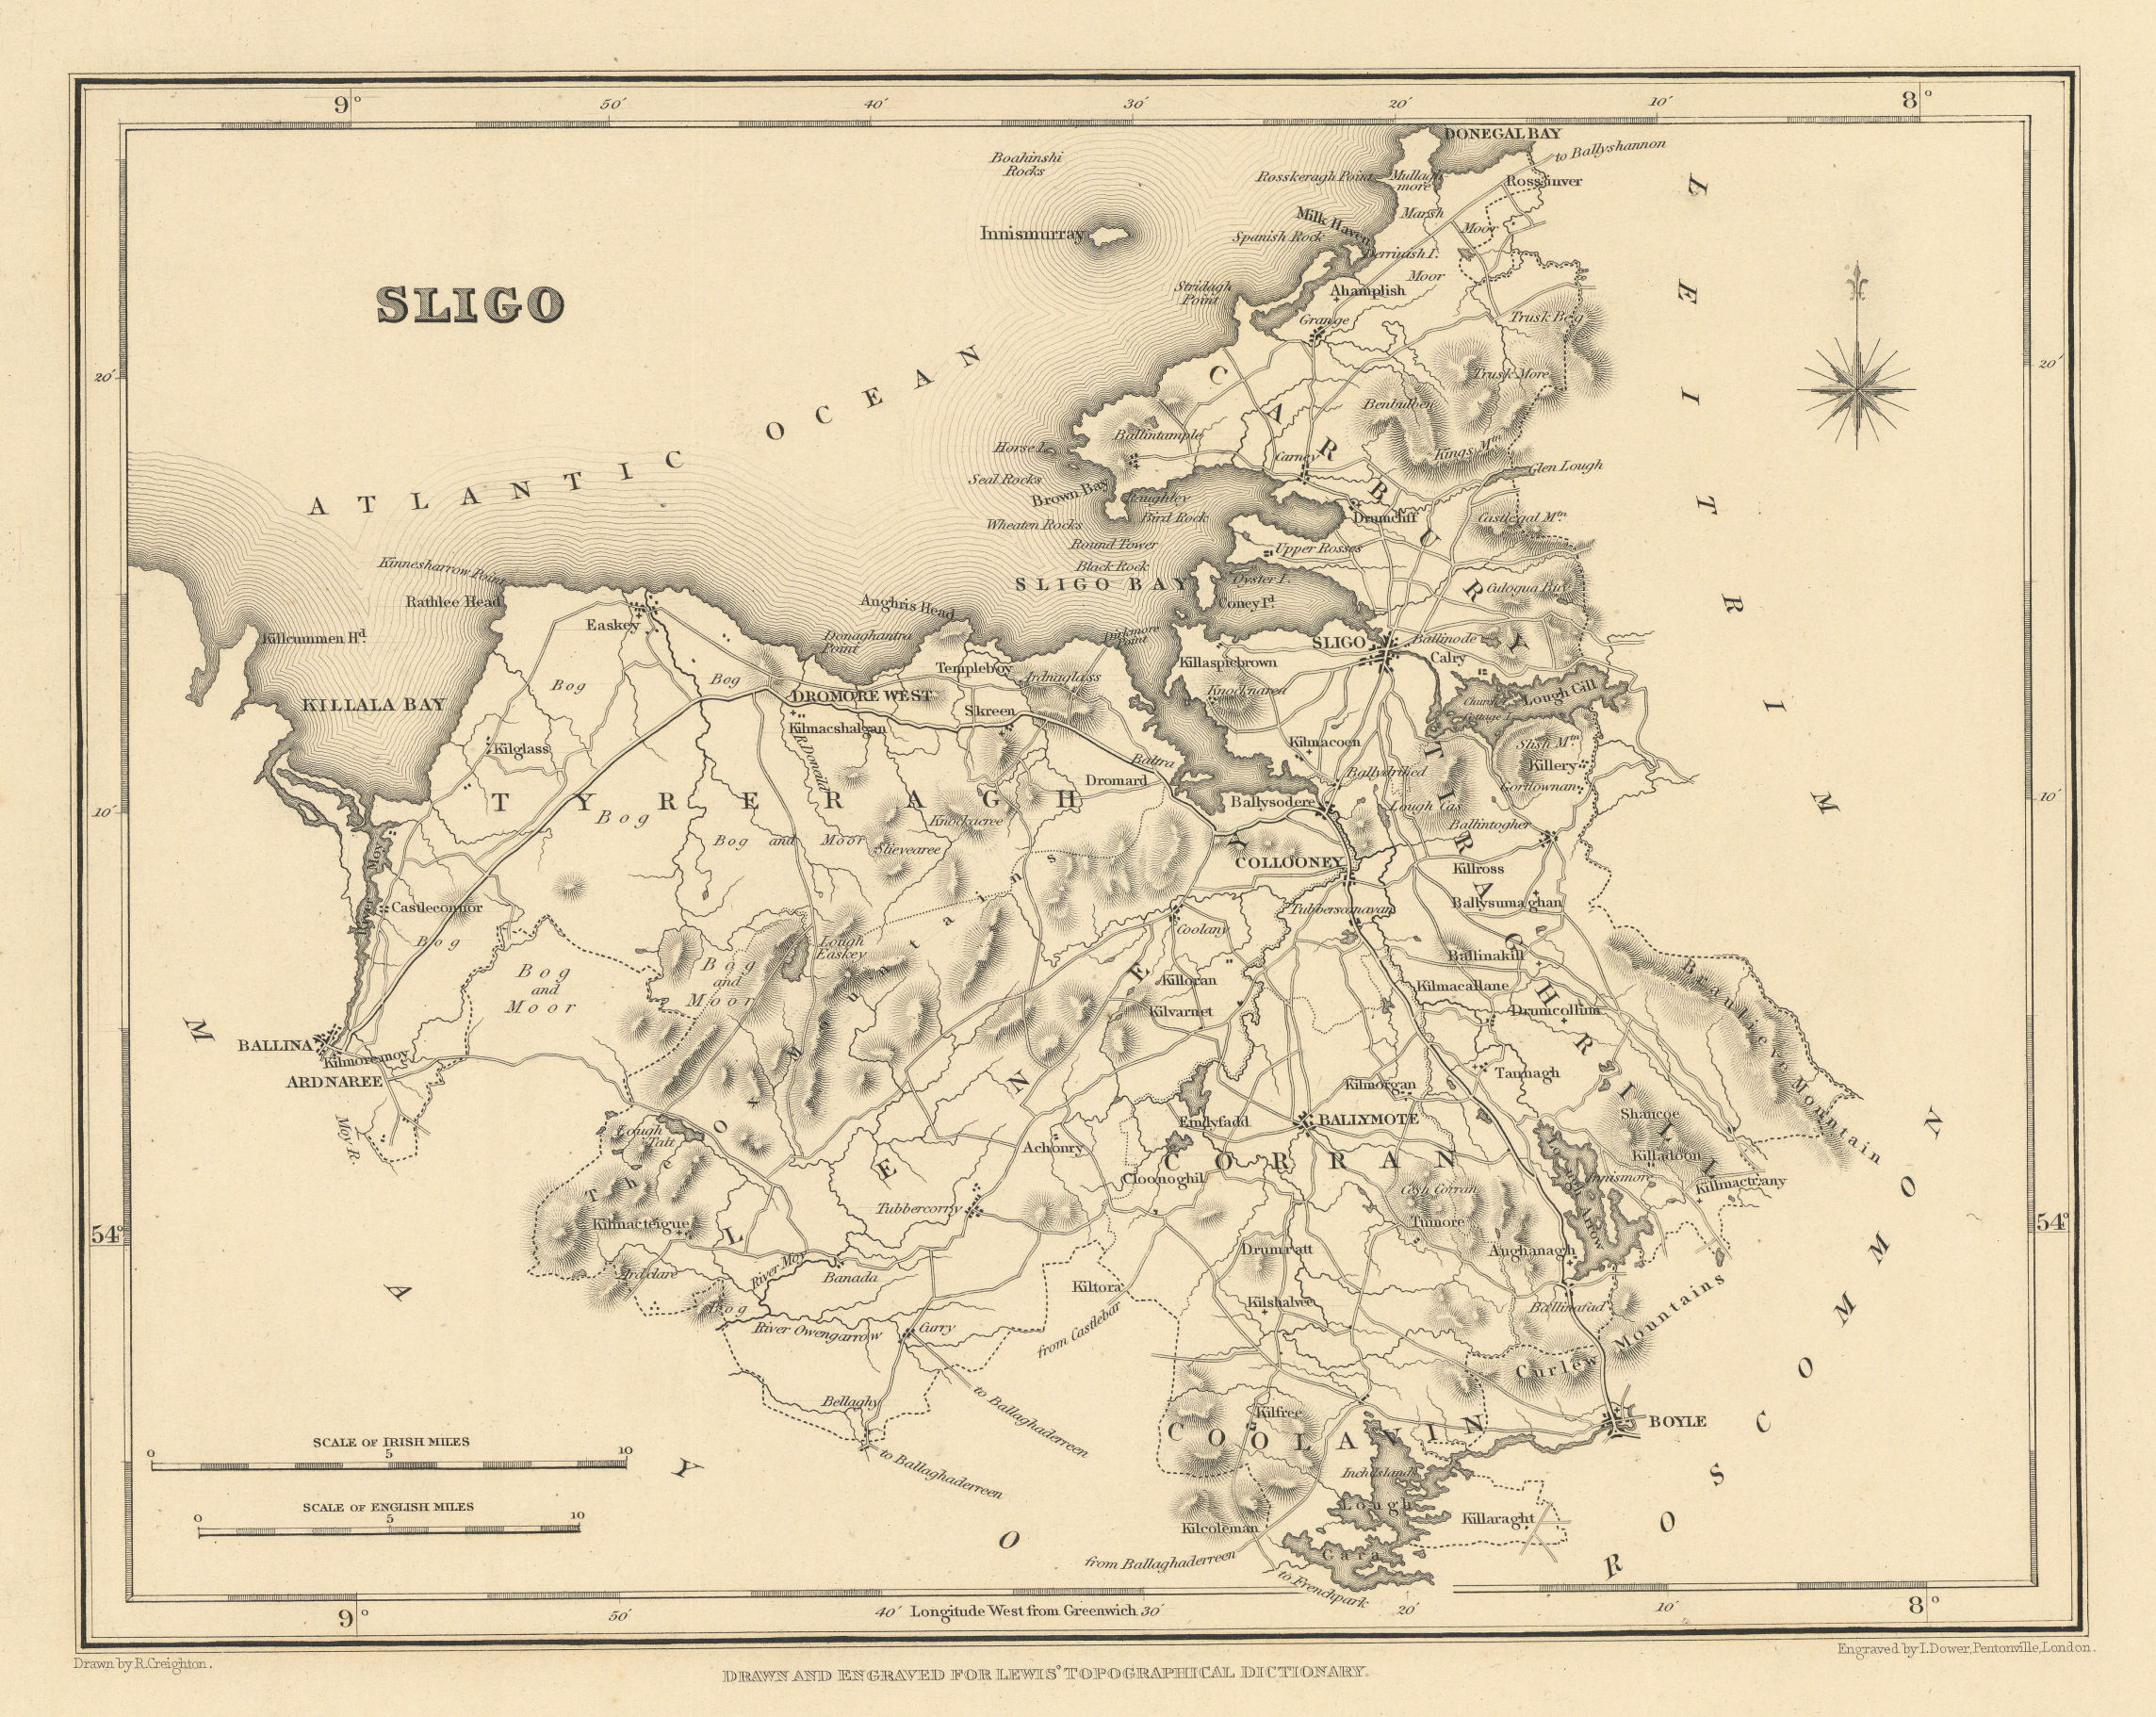 COUNTY SLIGO antique map for LEWIS by CREIGHTON & DOWER - Ireland 1837 old